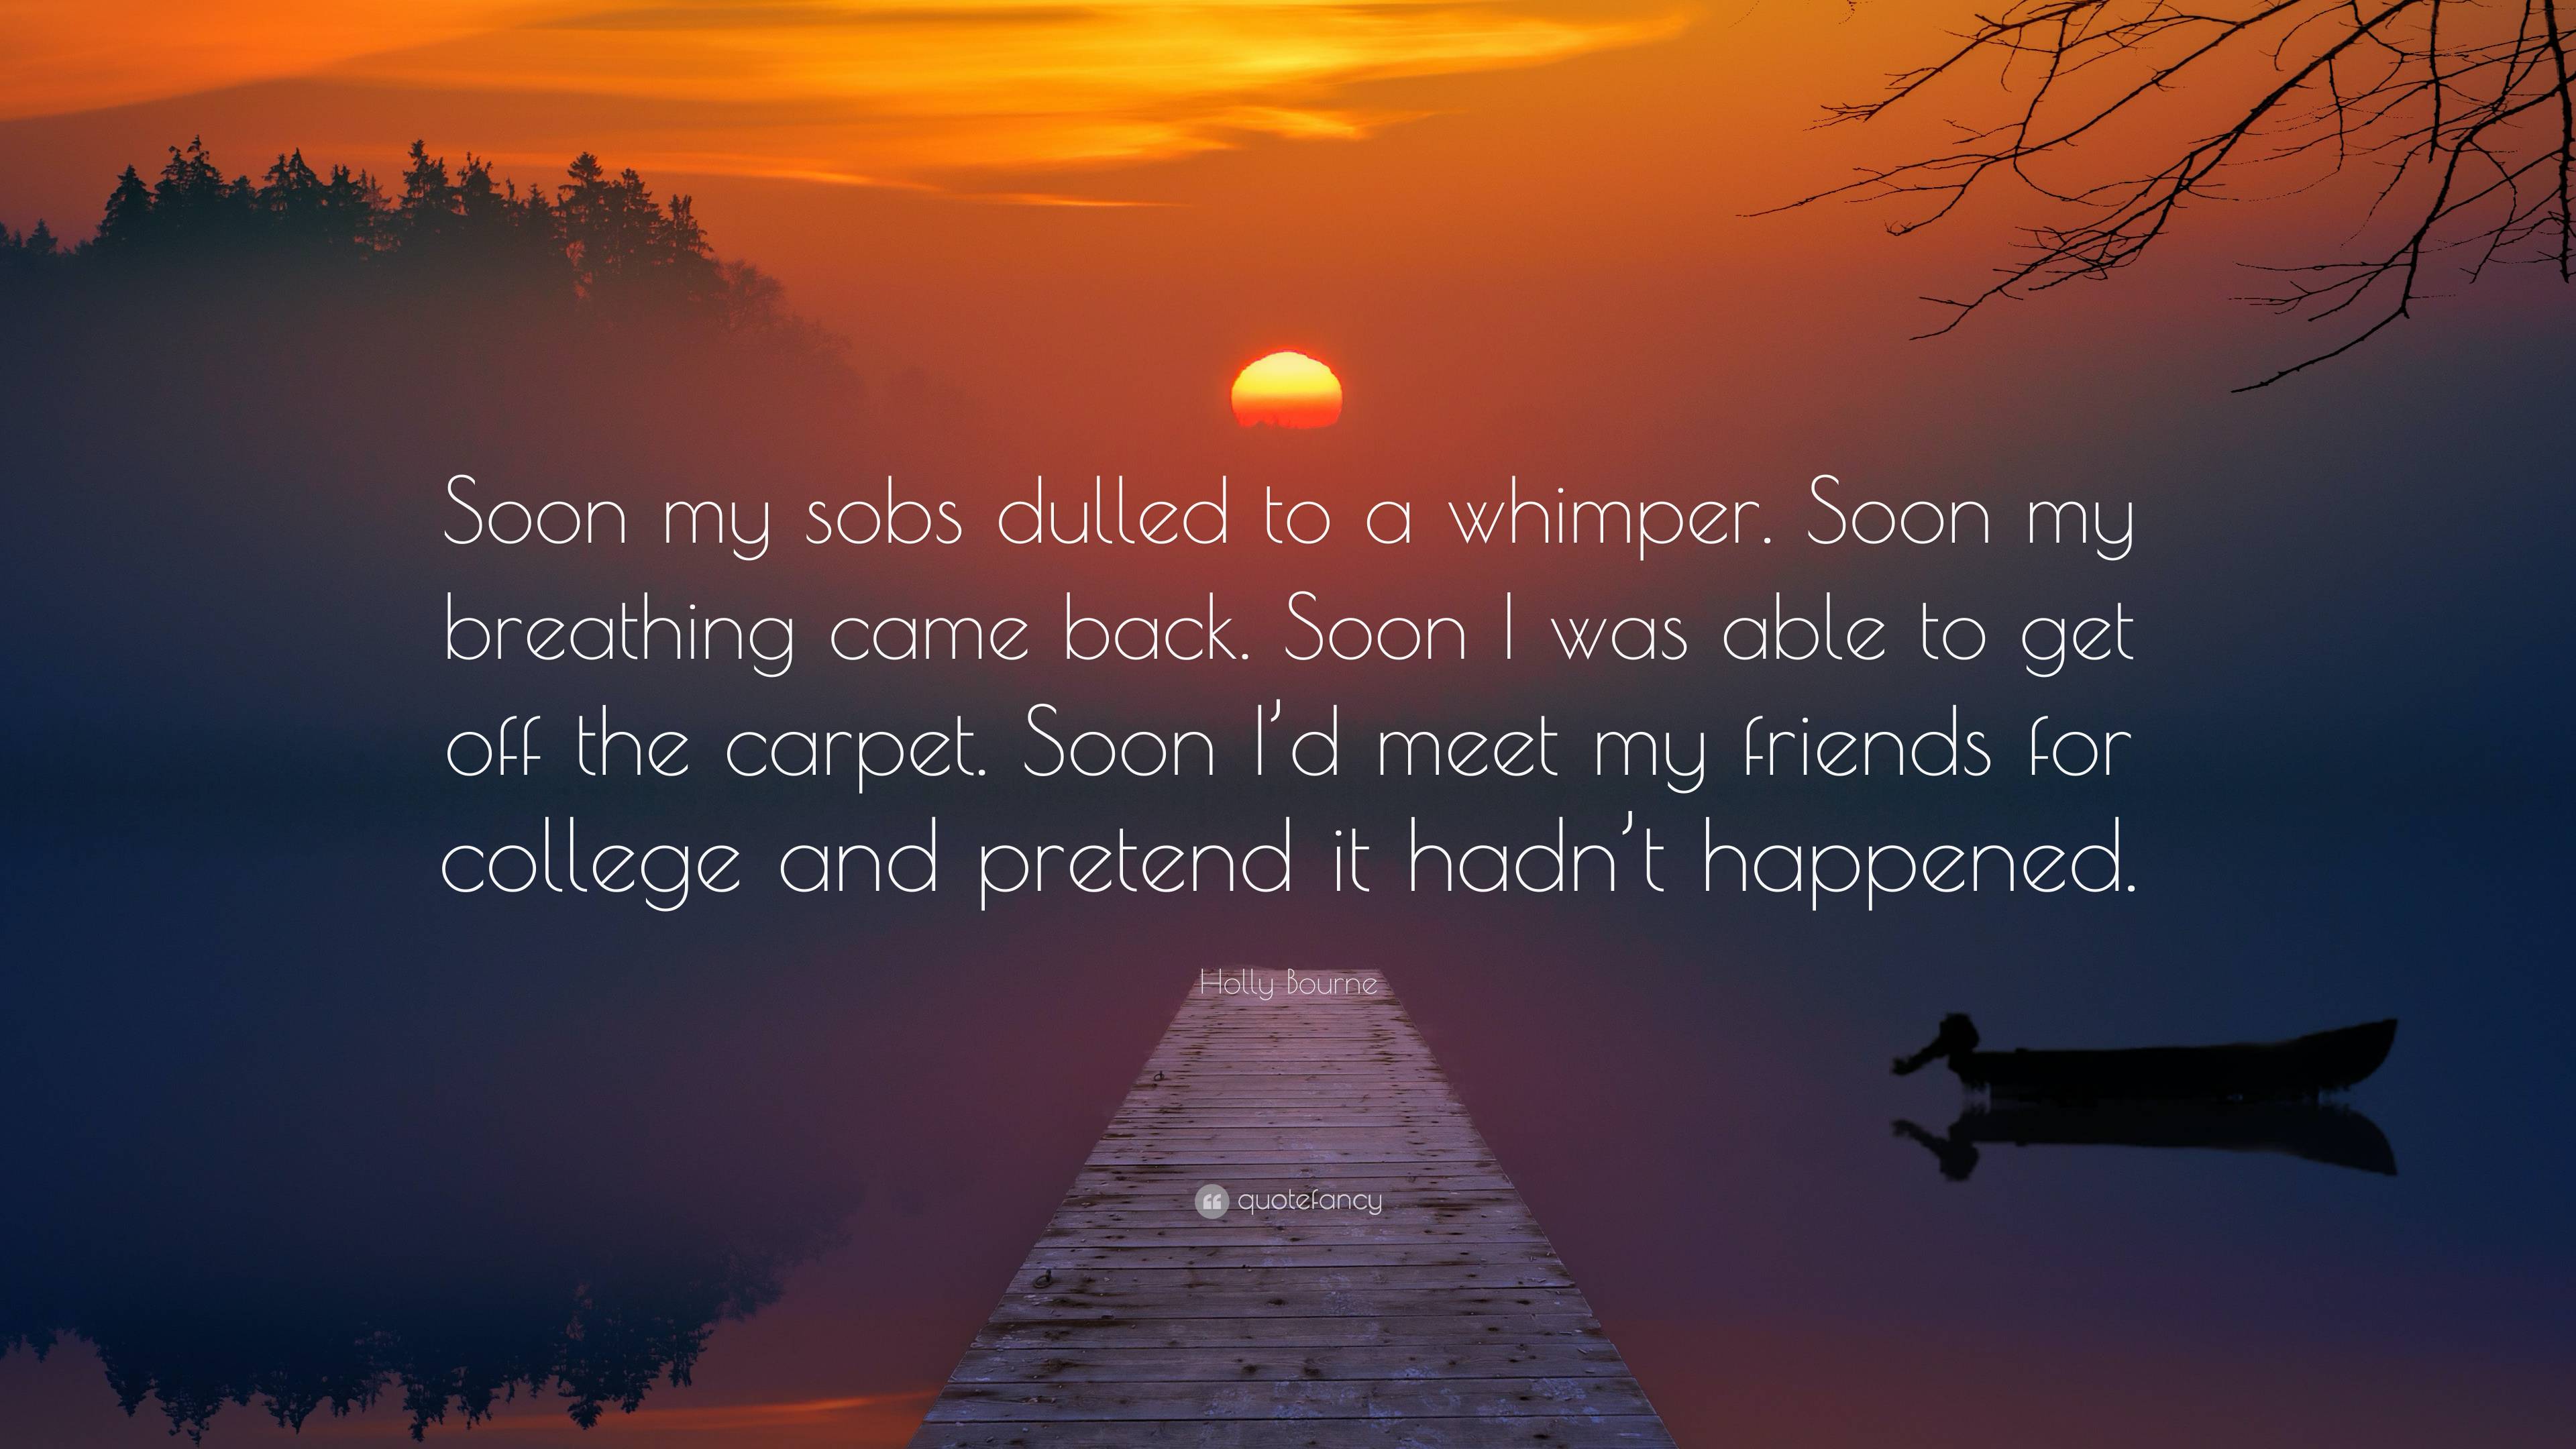 Holly Bourne Quote: “Soon my sobs dulled to a whimper. Soon my ...